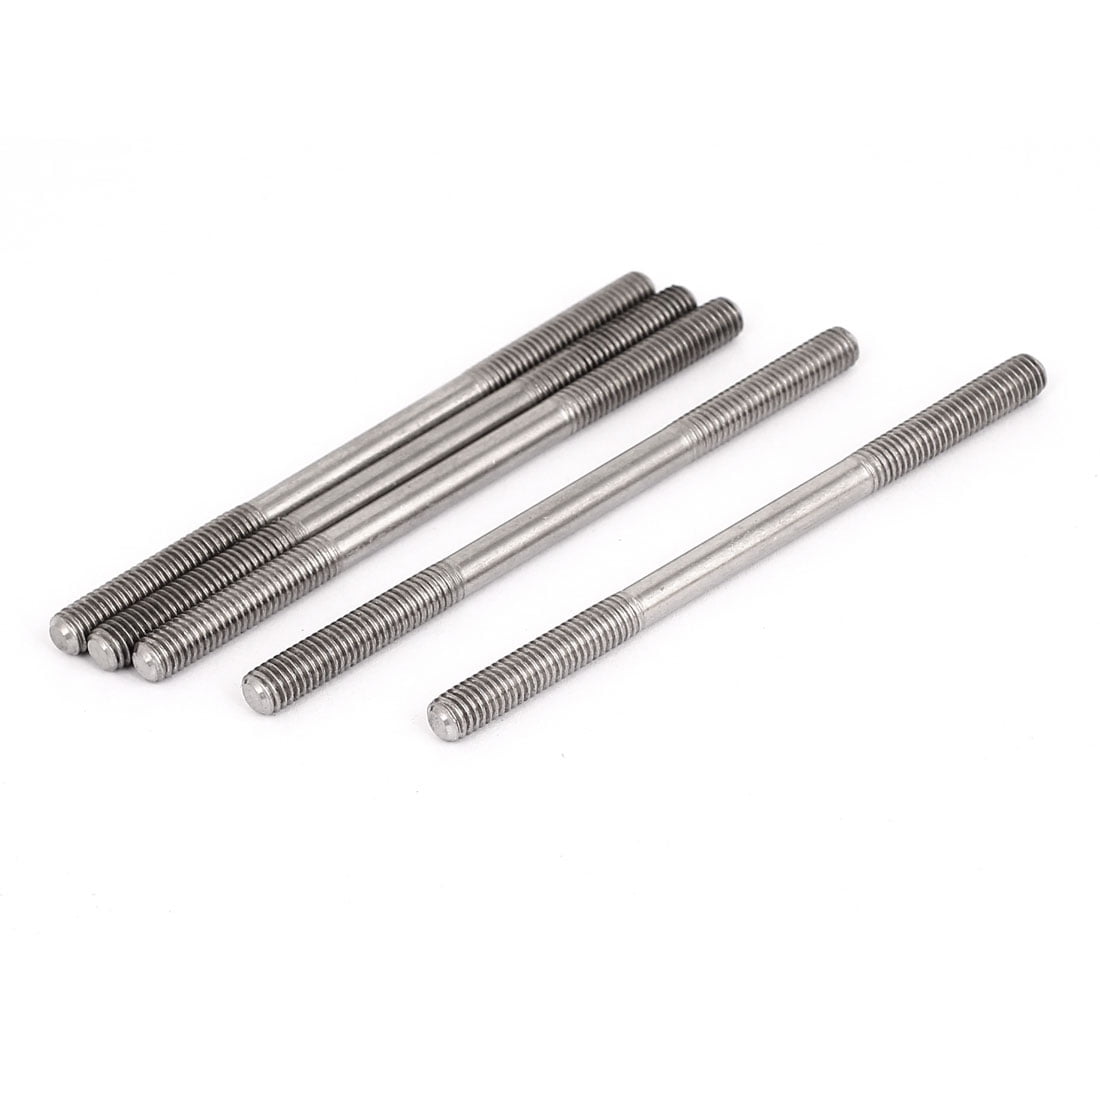 10 PCS Metric Thread M6*40 mm 304 Stainless Steel Studs Double thread